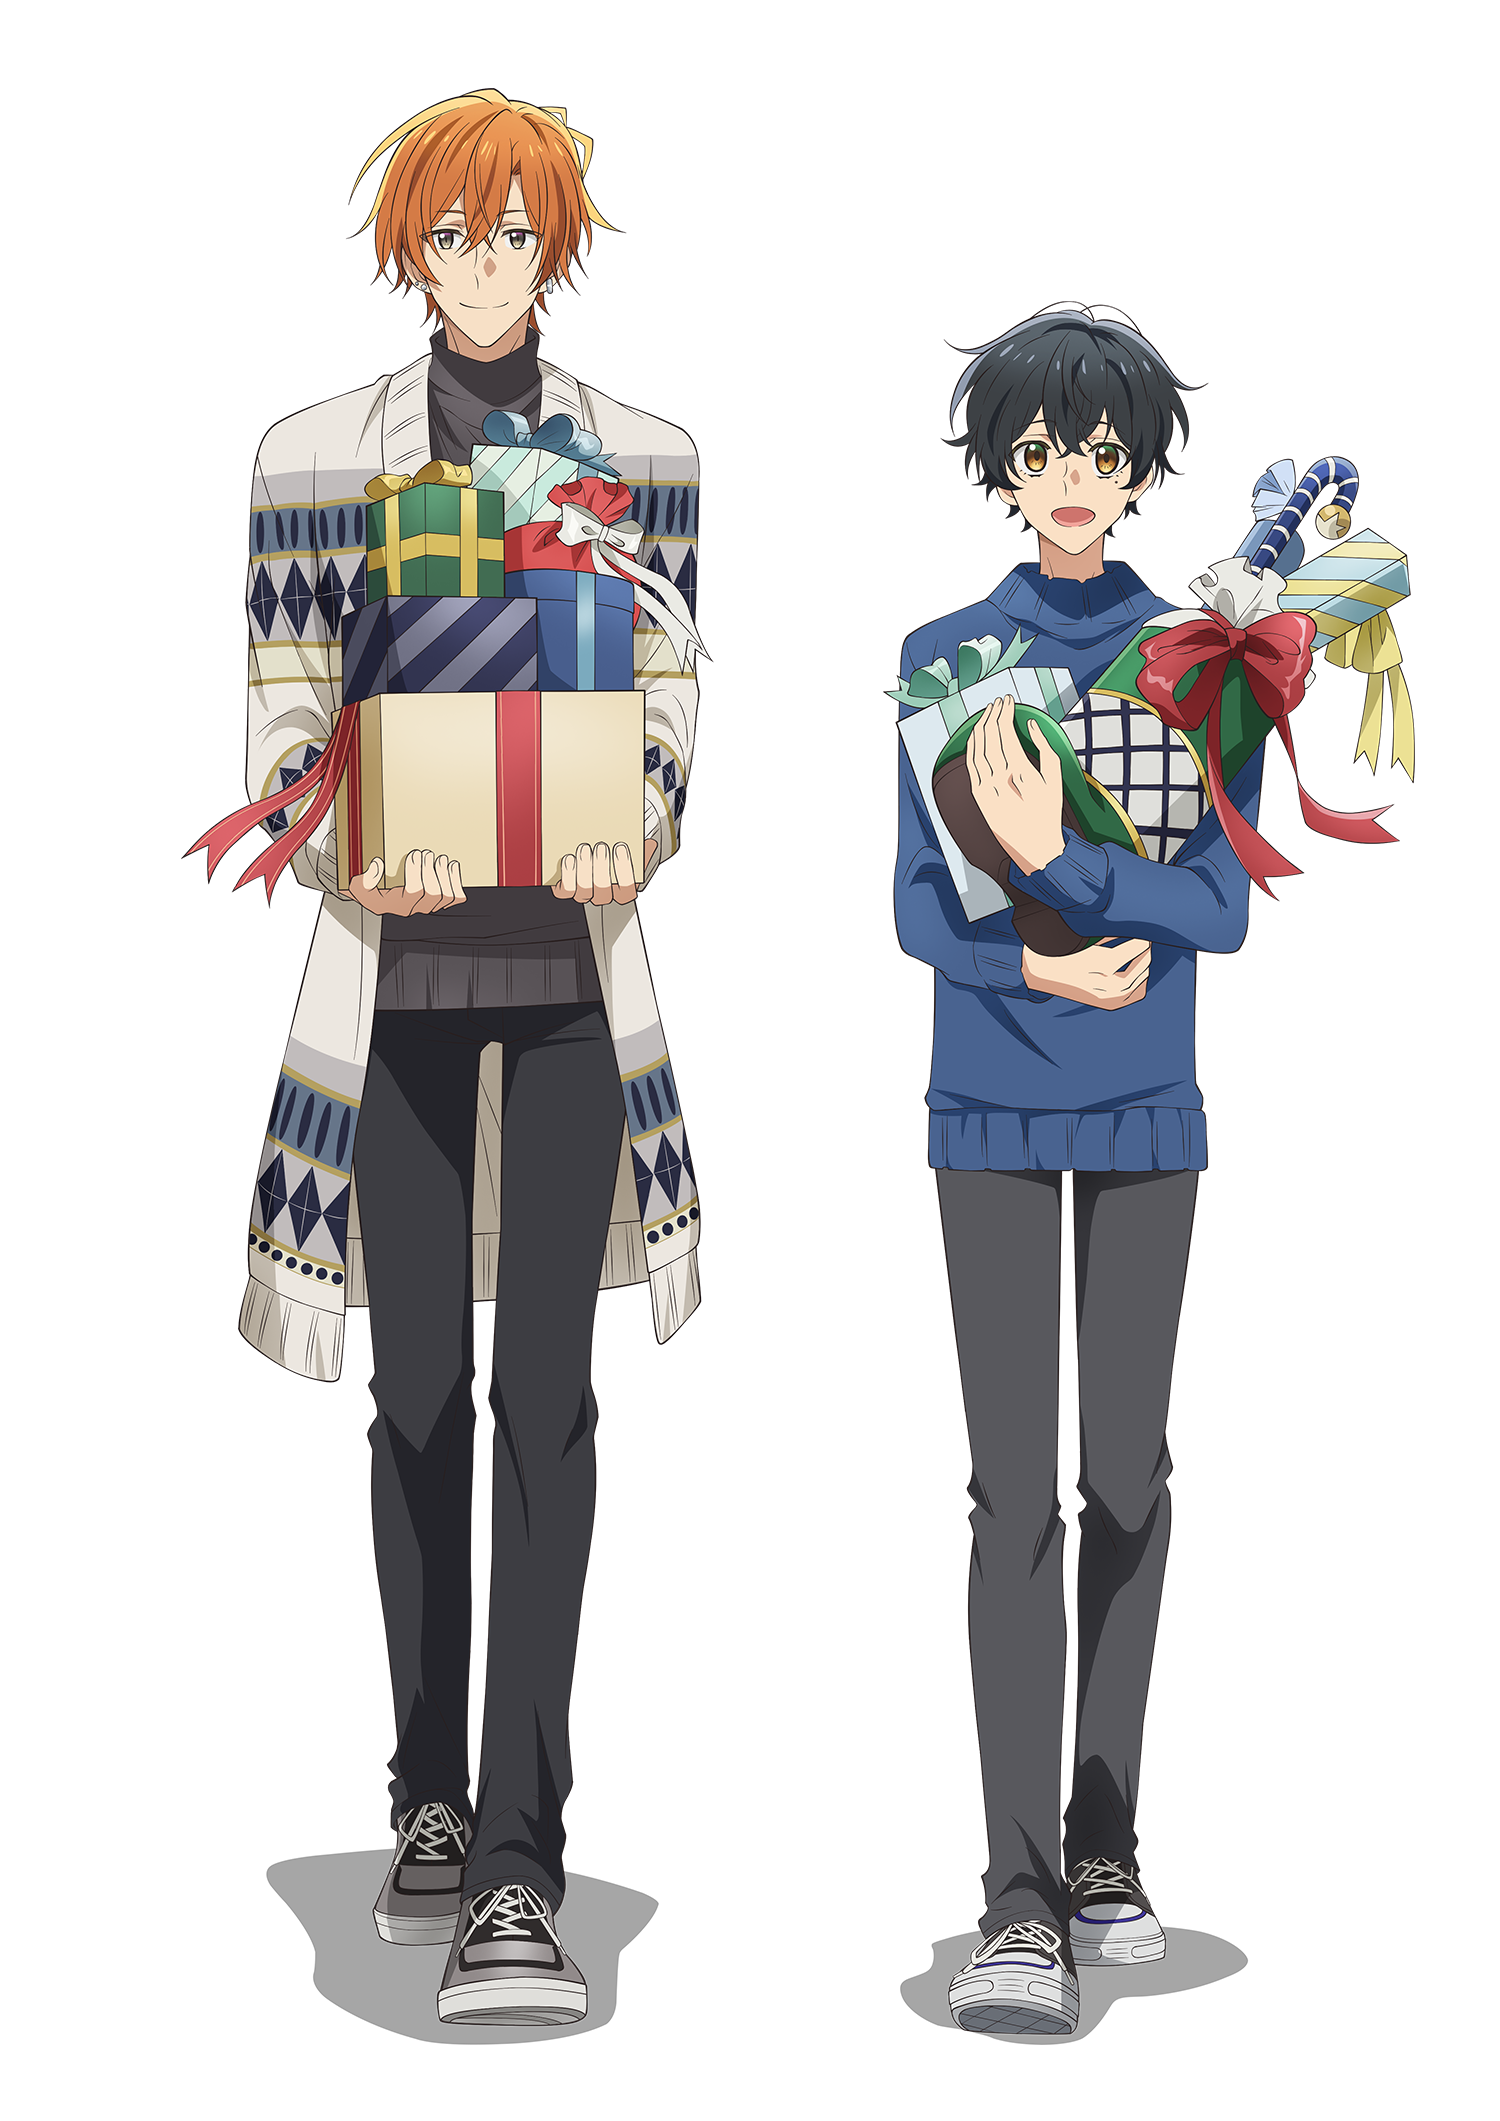 A promotional visual for the upcoming Sasaki and Miyano TV anime featuring the lead characters, Sasaki and Miyano, dressed in warm winter clothes and carrying armloads of wrapped and packaged Christmas presents.